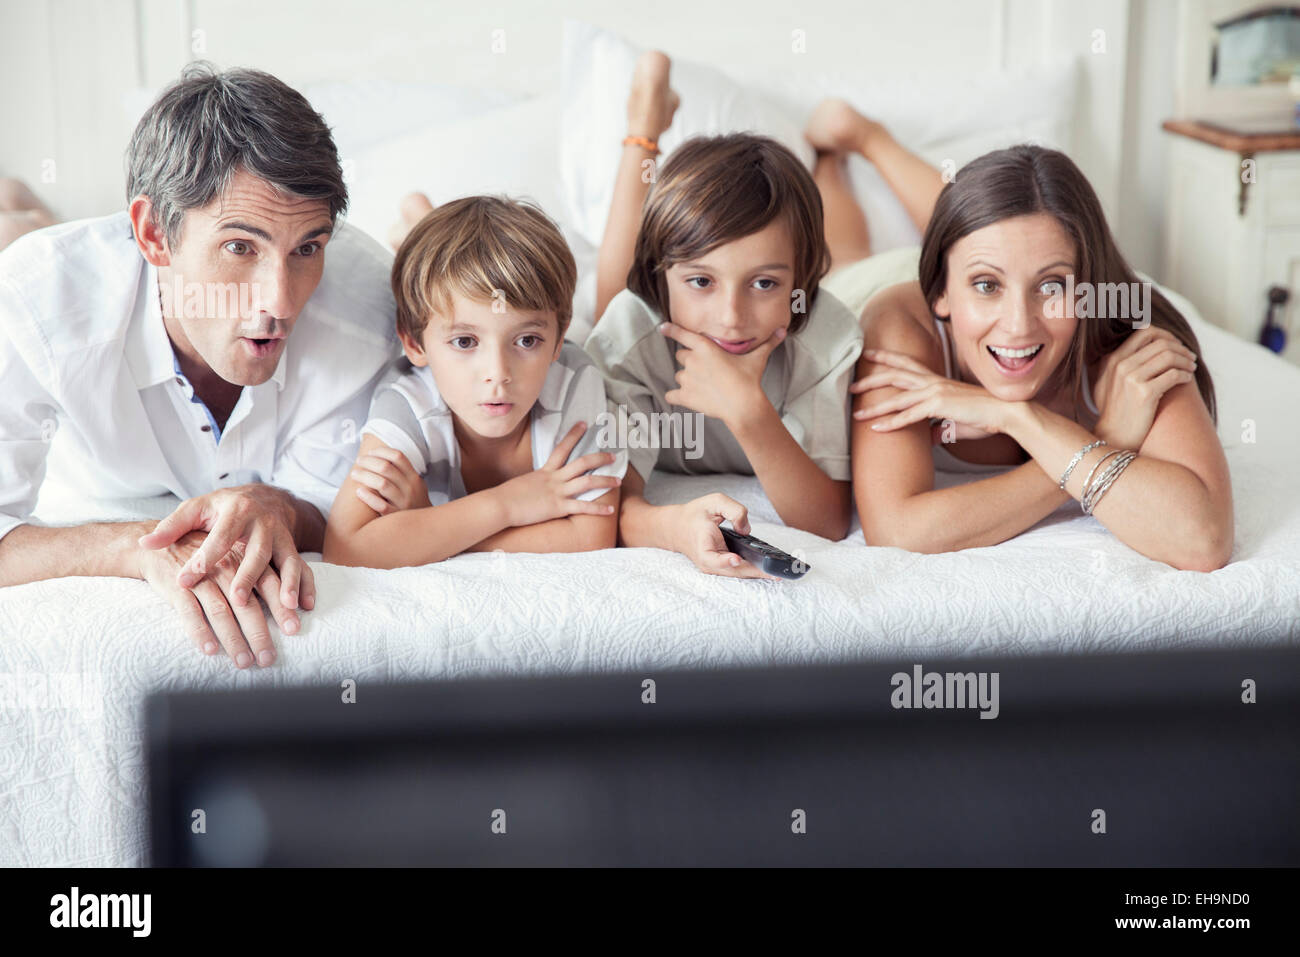 Family watching TV on bed, portrait Stock Photo